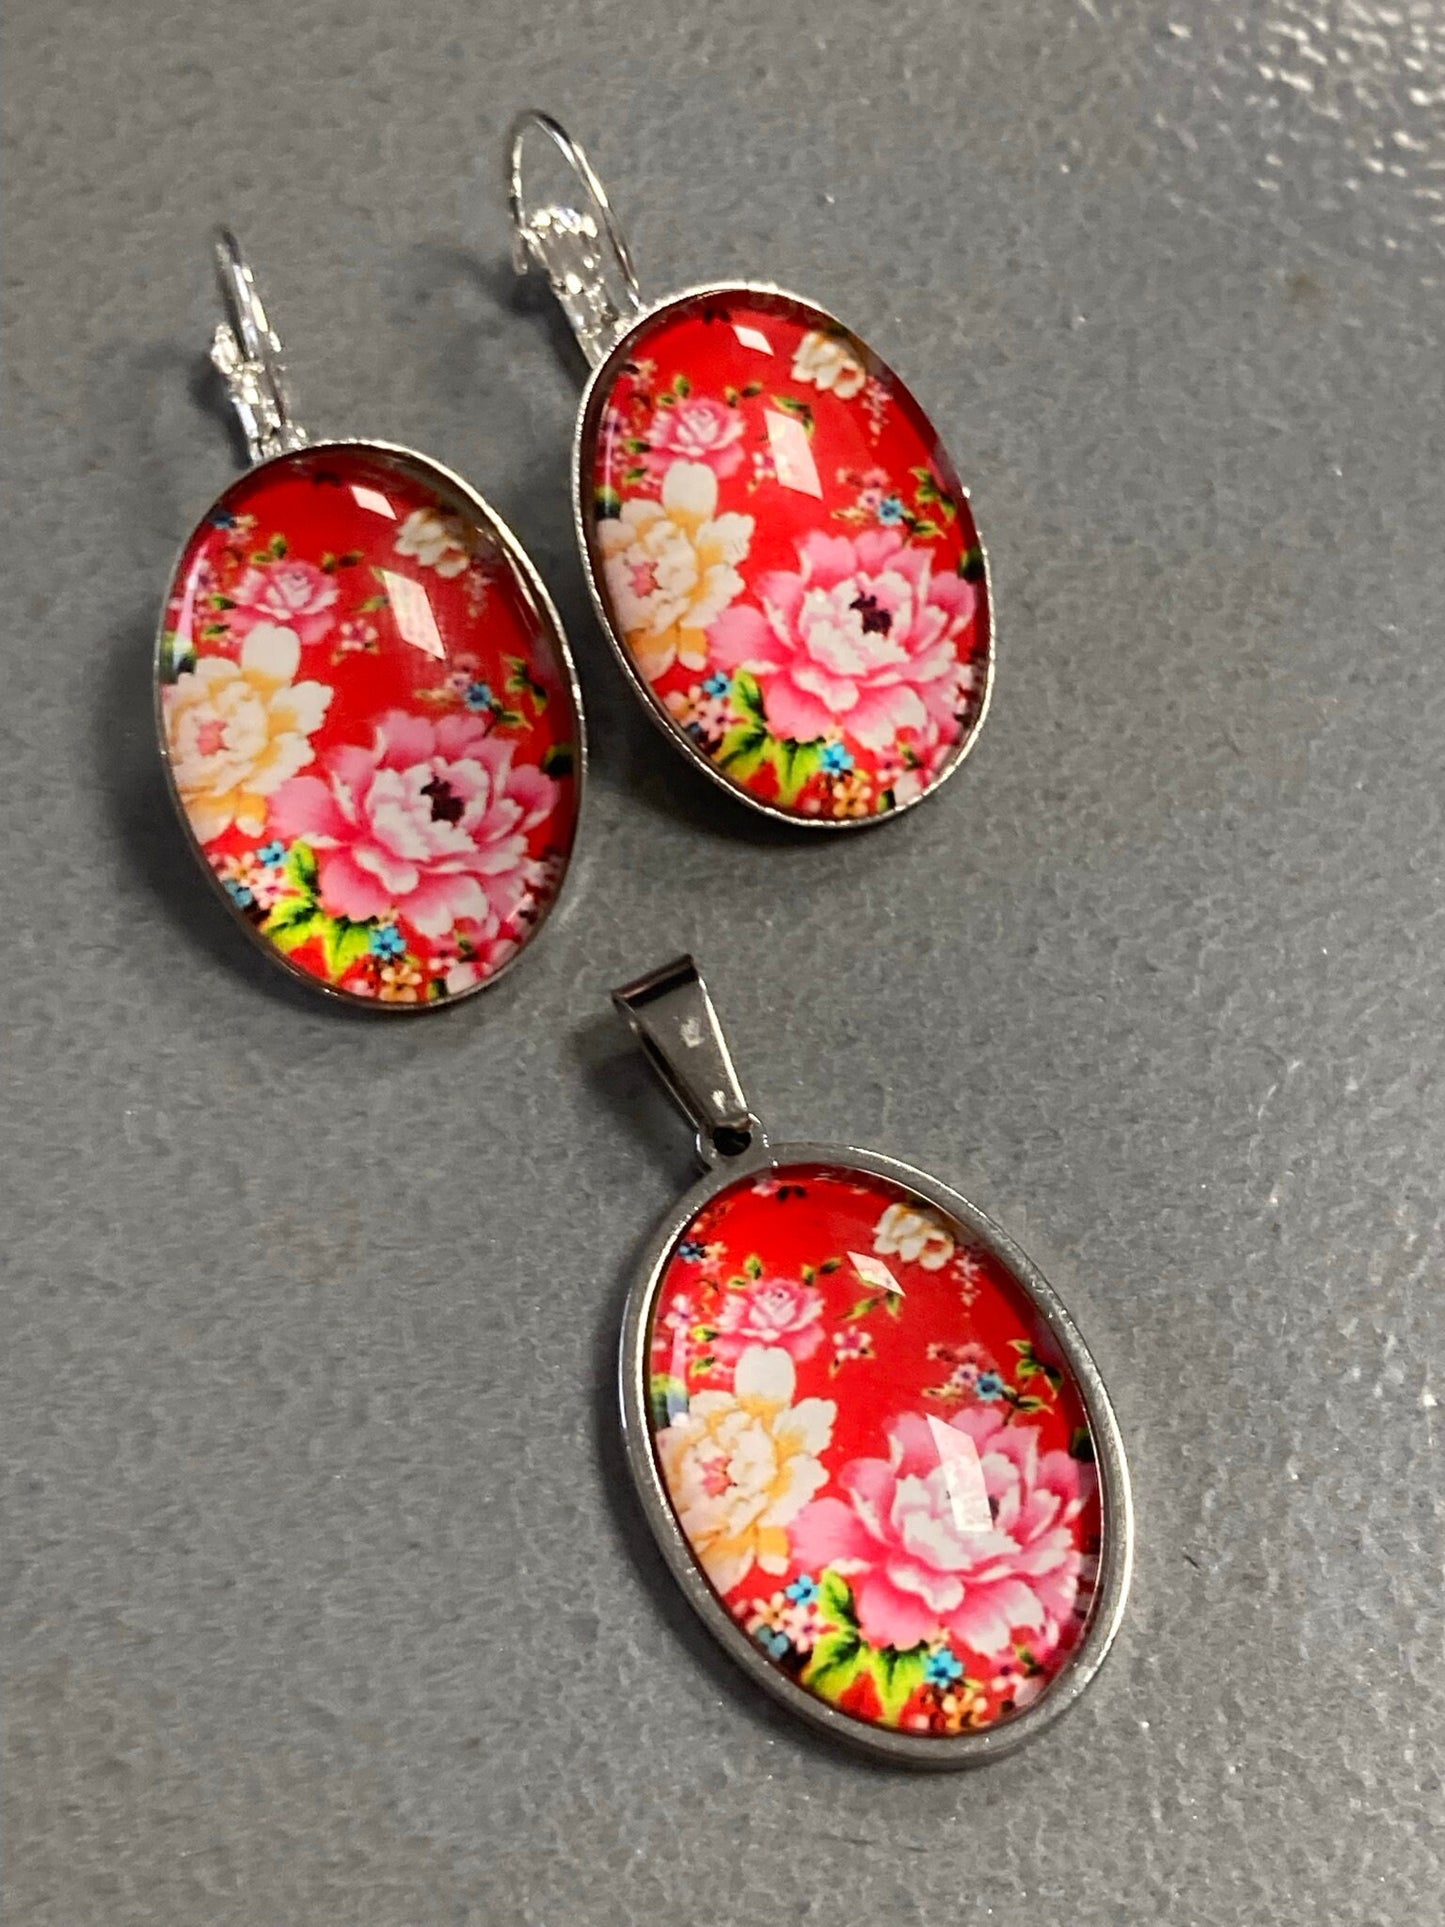 Red Pink roses Spring garden flowers oval glass cabochon floral earrings gold tone